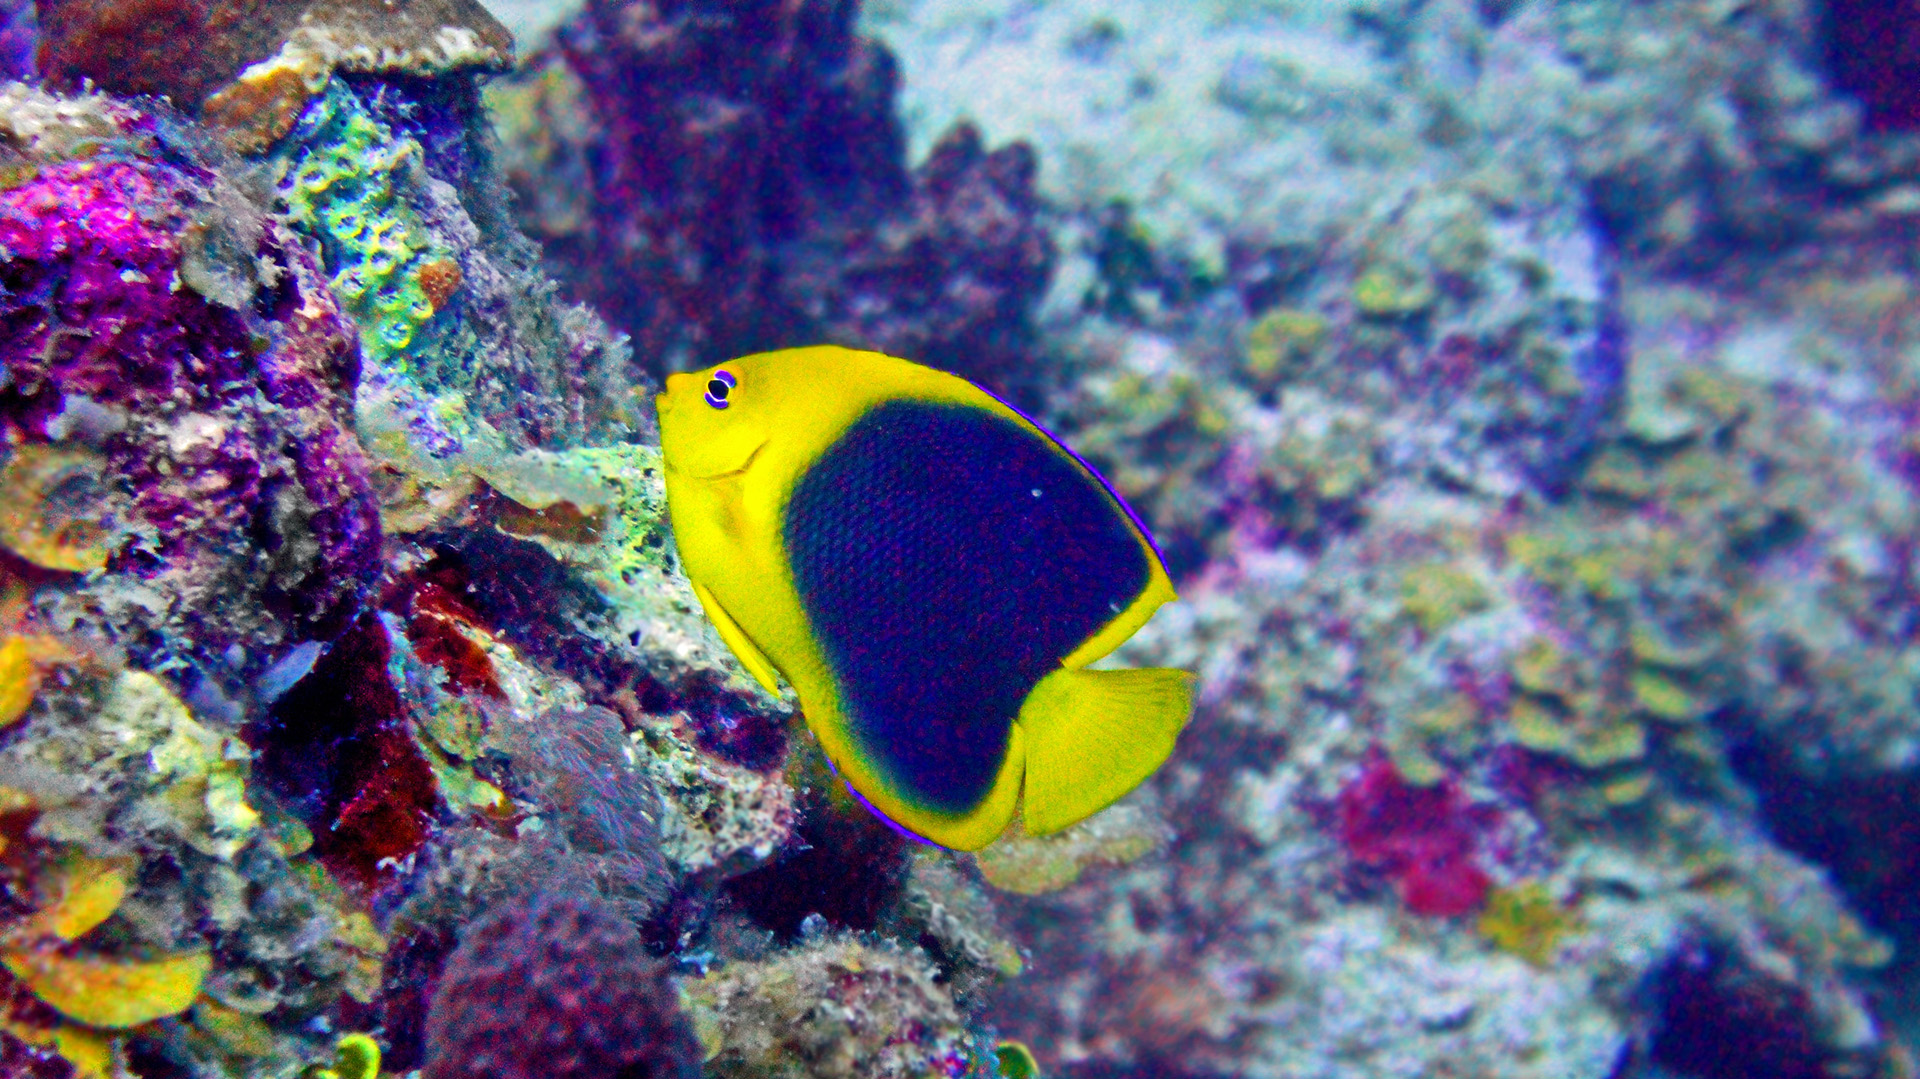 Angelfish and coral underwater in the Caribbean